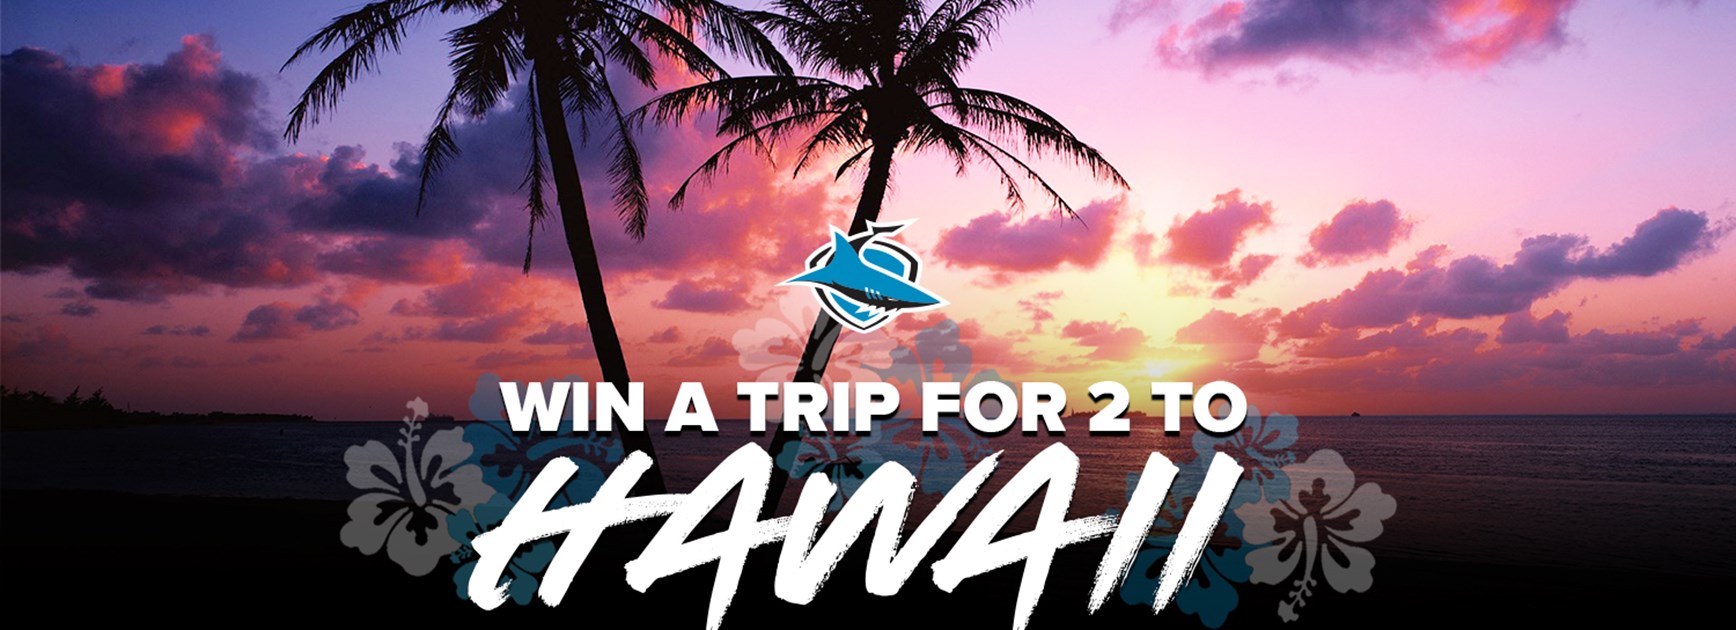 Win a trip for two to Hawaii